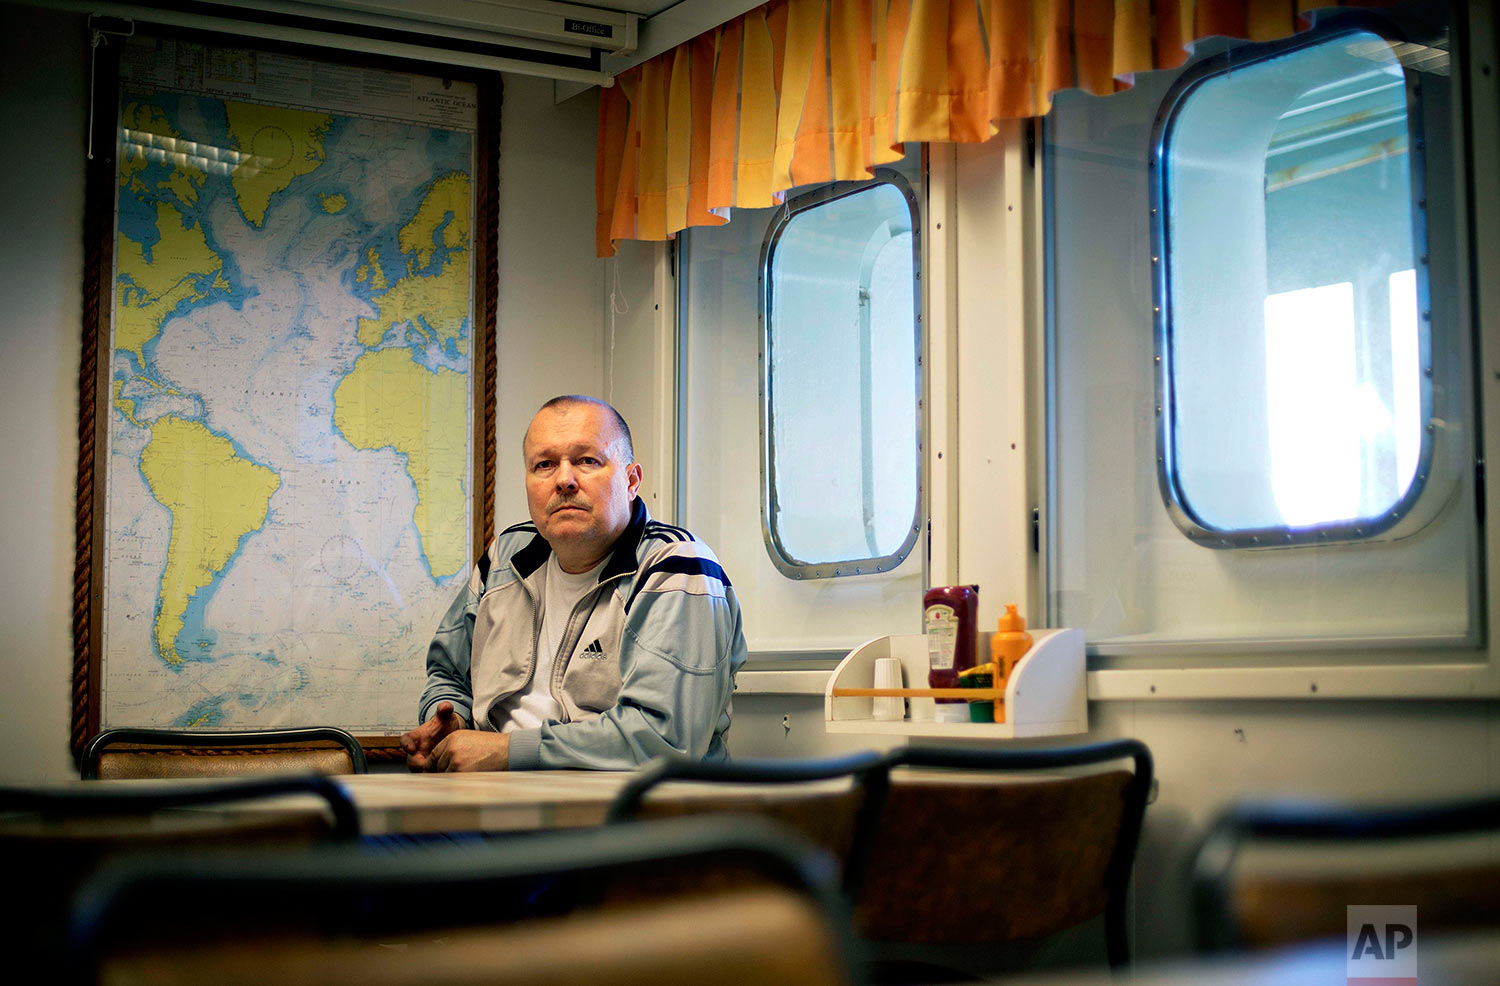  Engine repairman Jari Jarvinen, 58, sits for a portrait in the mess hall after finishing a night shift aboard the Finnish icebreaker MSV Nordica as it sails in the North Pacific Ocean toward the Bering Strait, Tuesday, July 11, 2017. Jarvinen starte